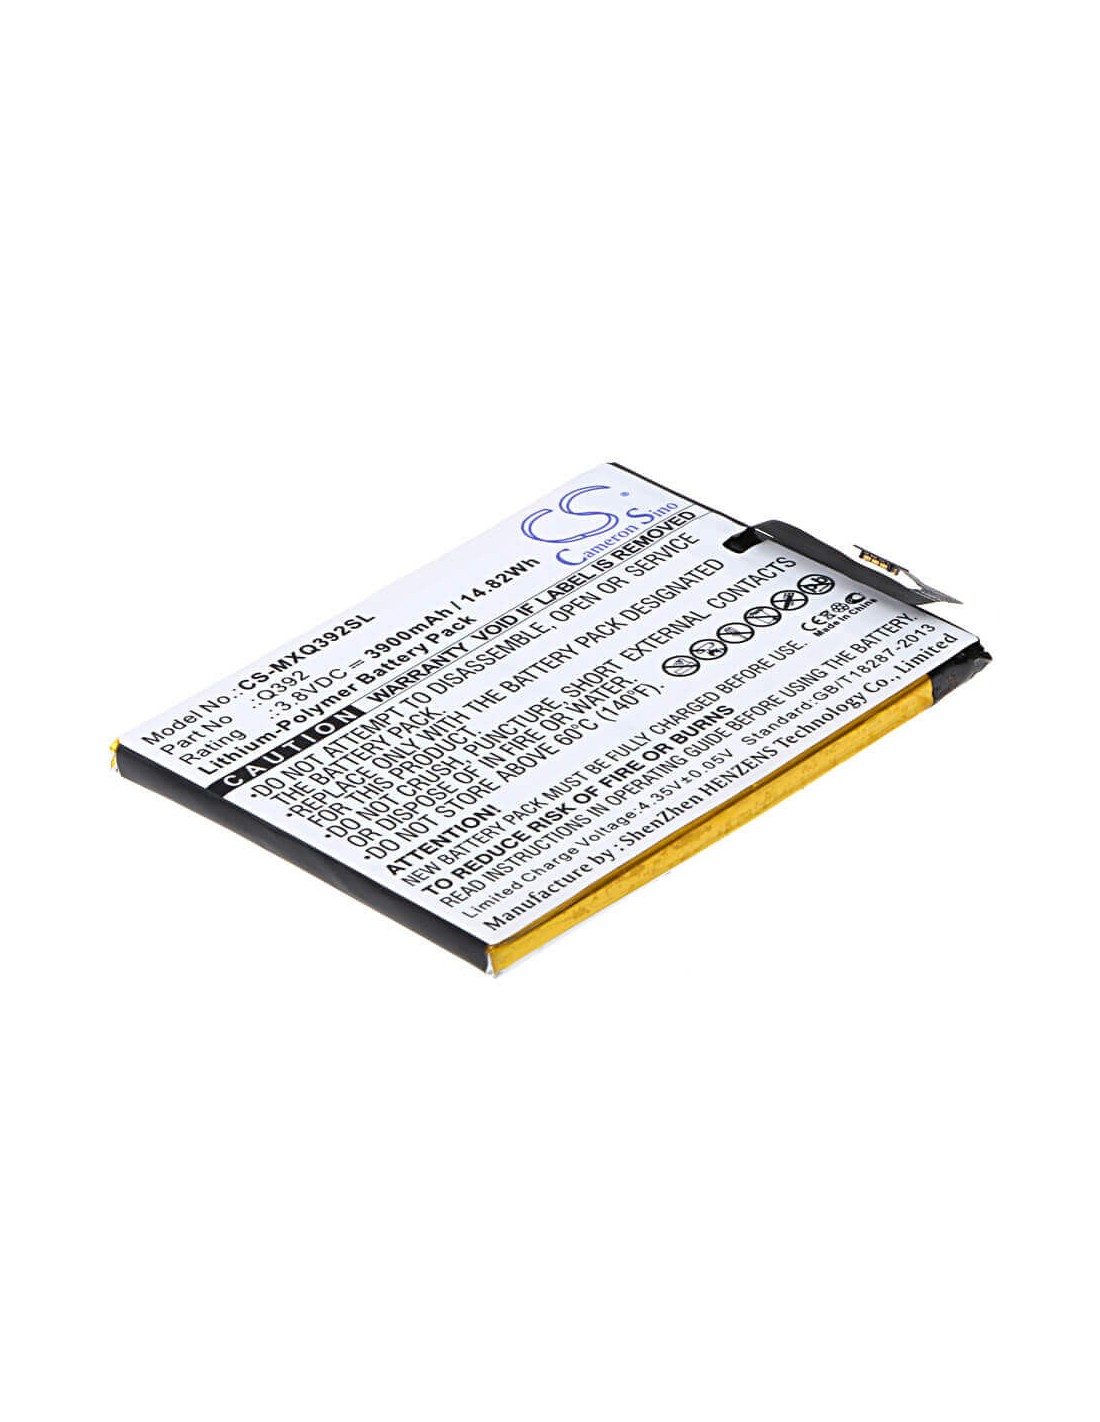 Battery for Micromax Q392, Canvas Juice 3 3.8V, 3900mAh - 14.82Wh